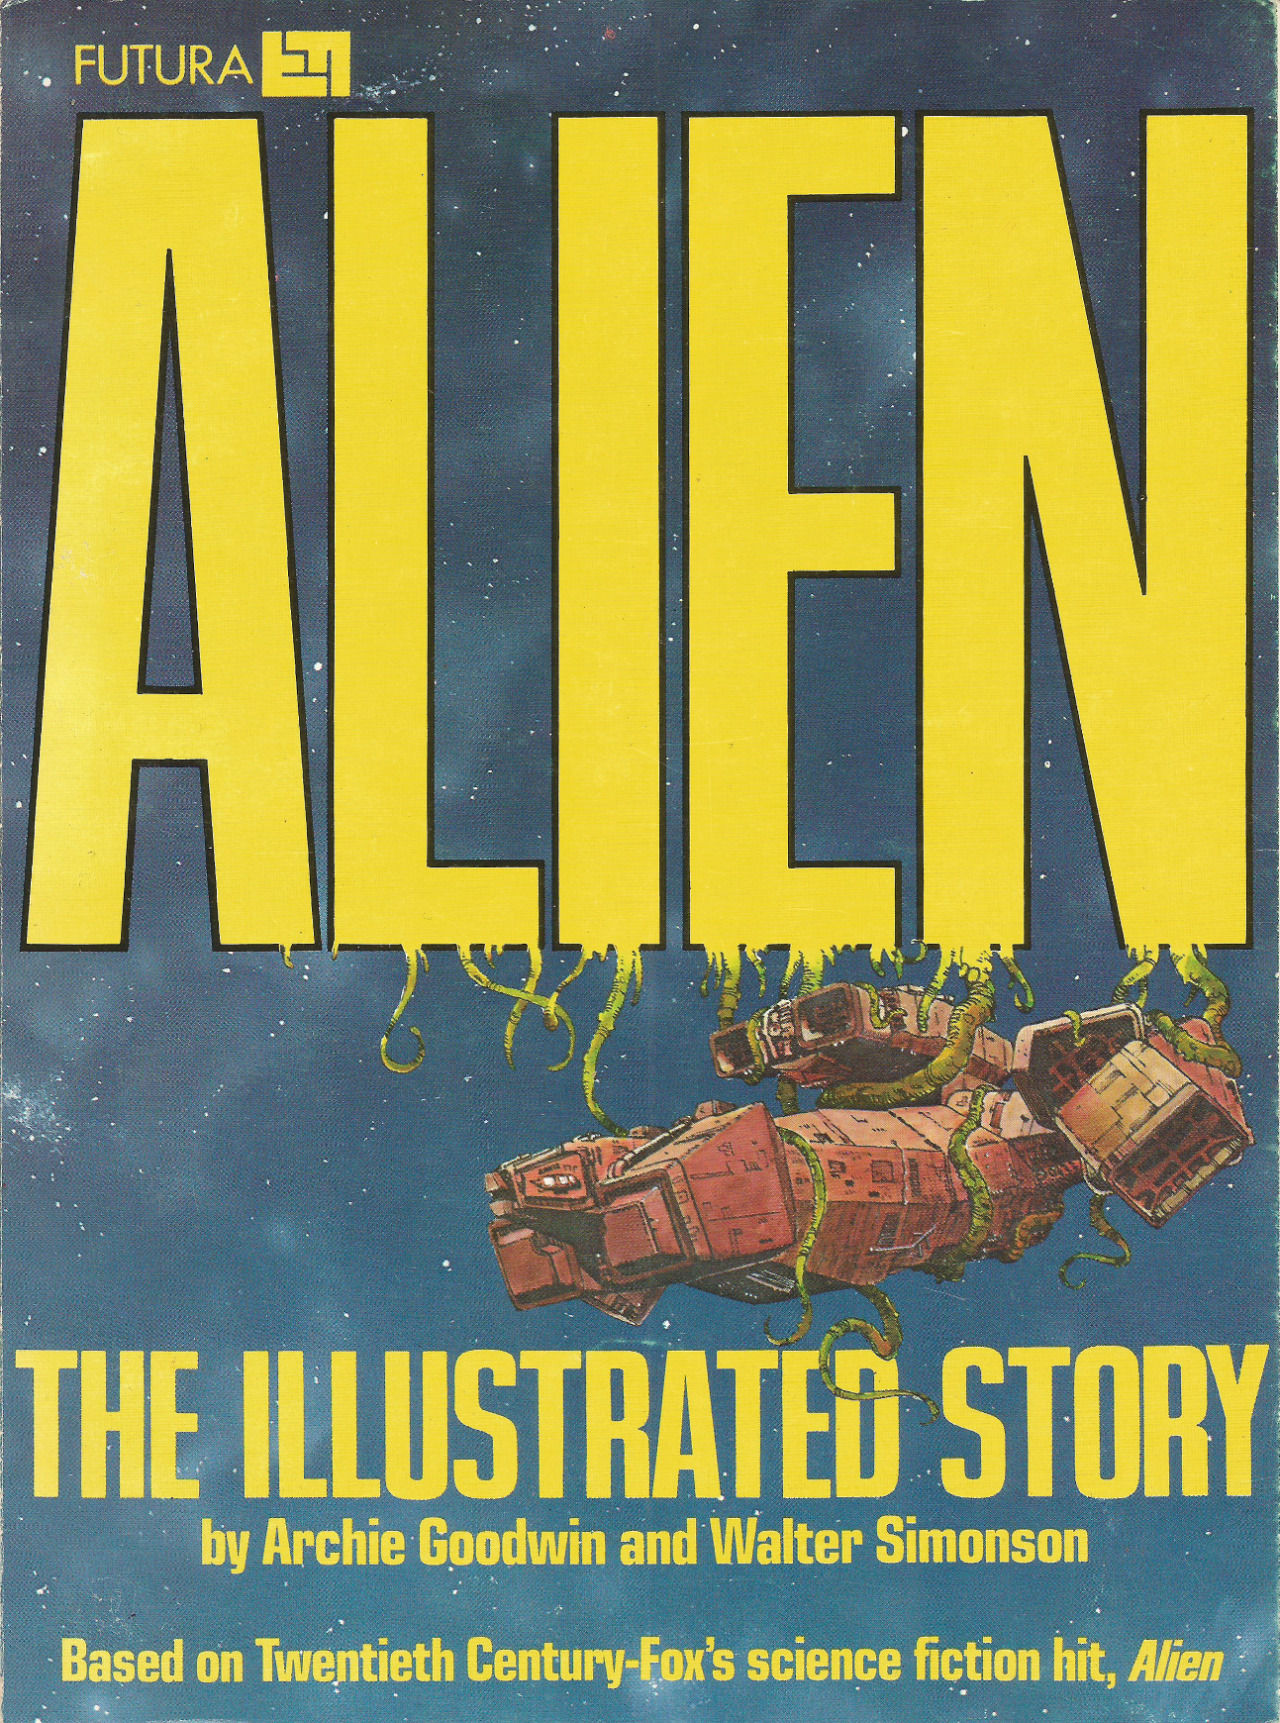 Alien: The Illustrated Story, by Archie Goodwin and Walter Simonson (Futura, 1979).From